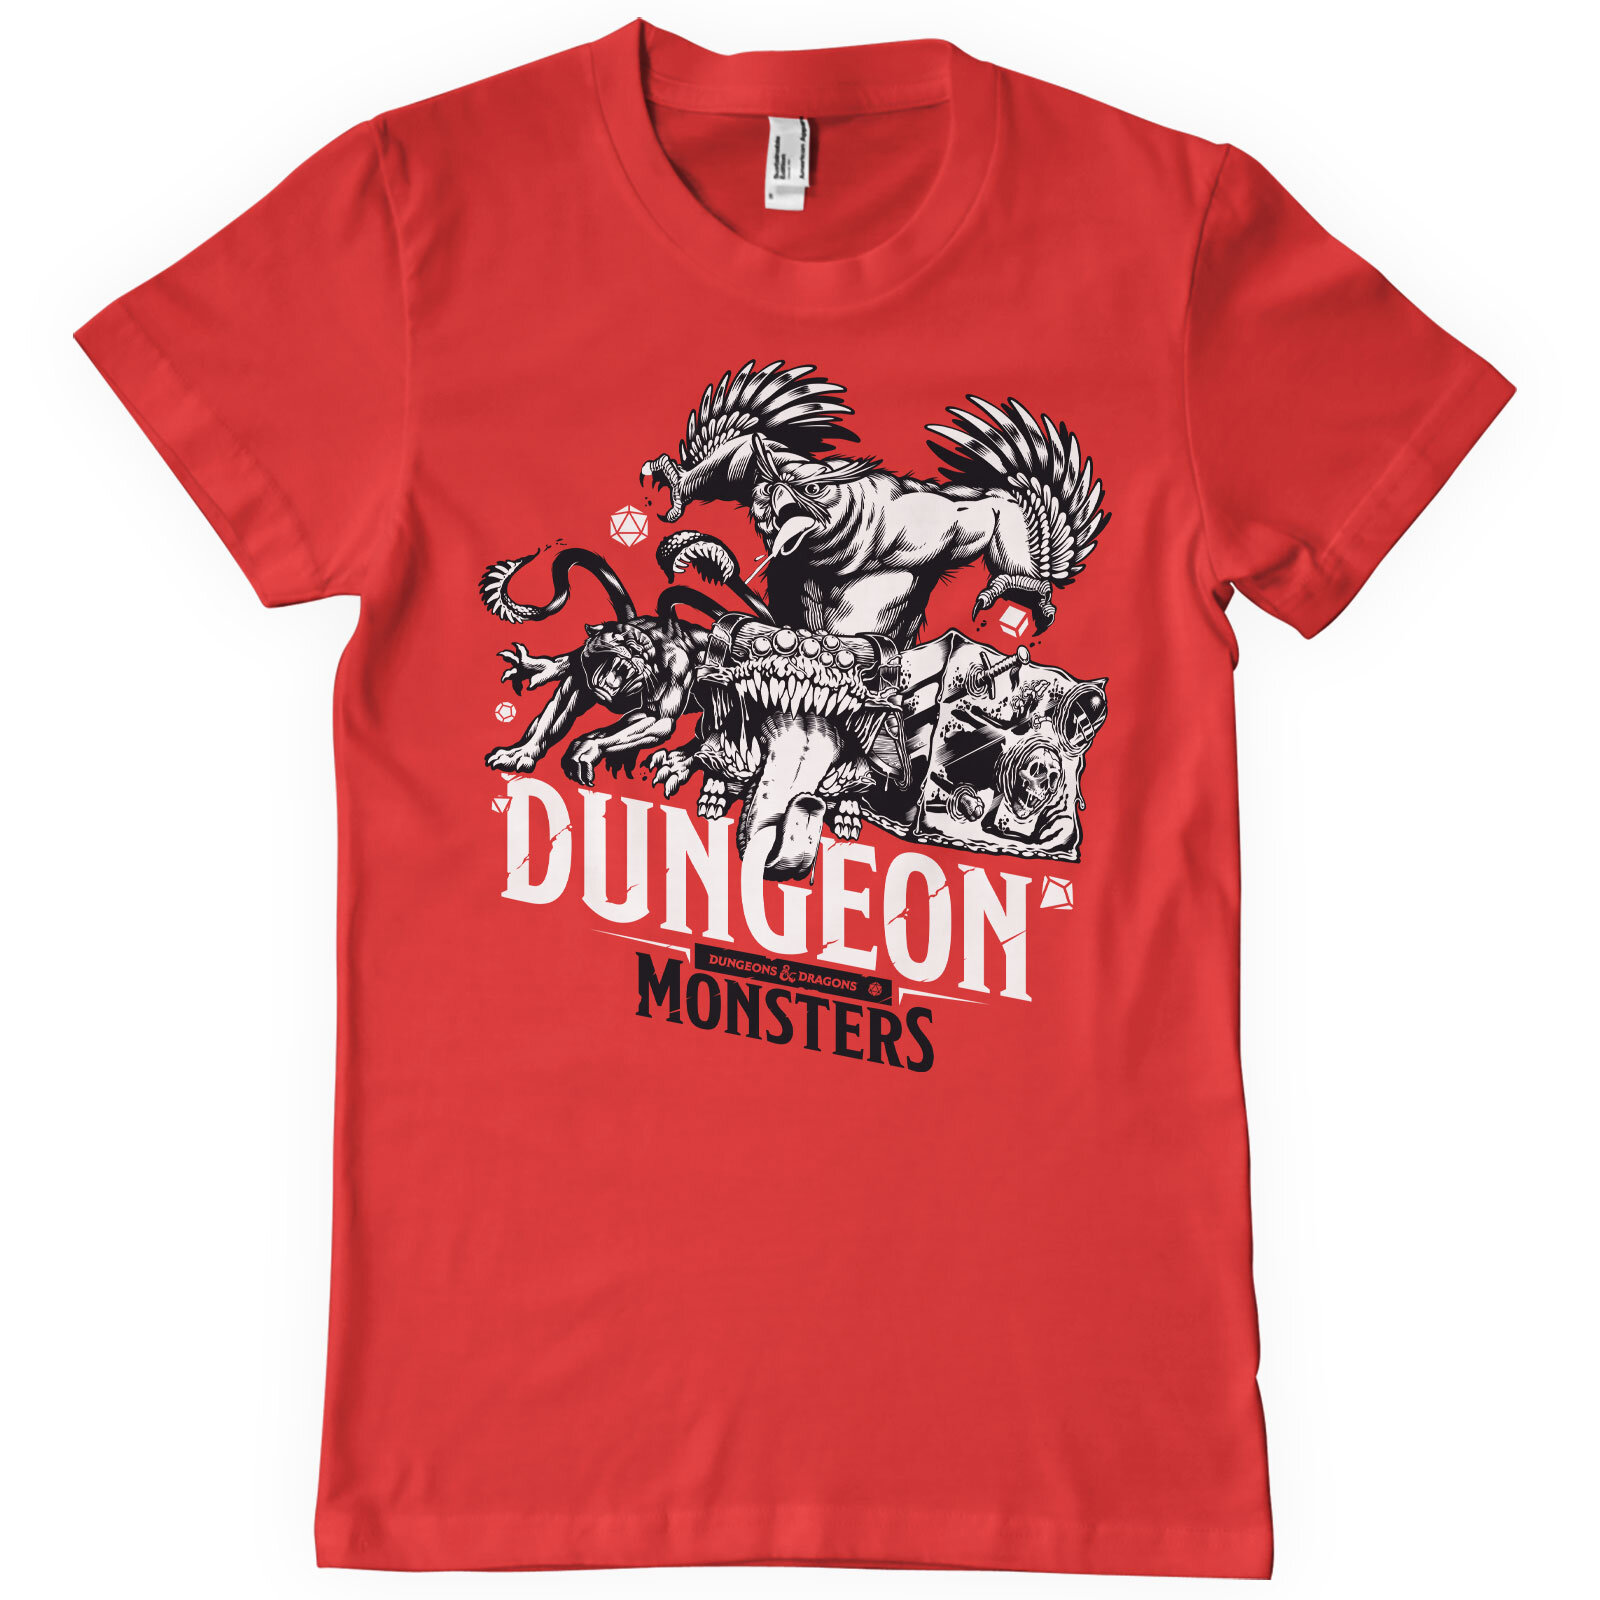 Dungeon Monsters T-Shirt